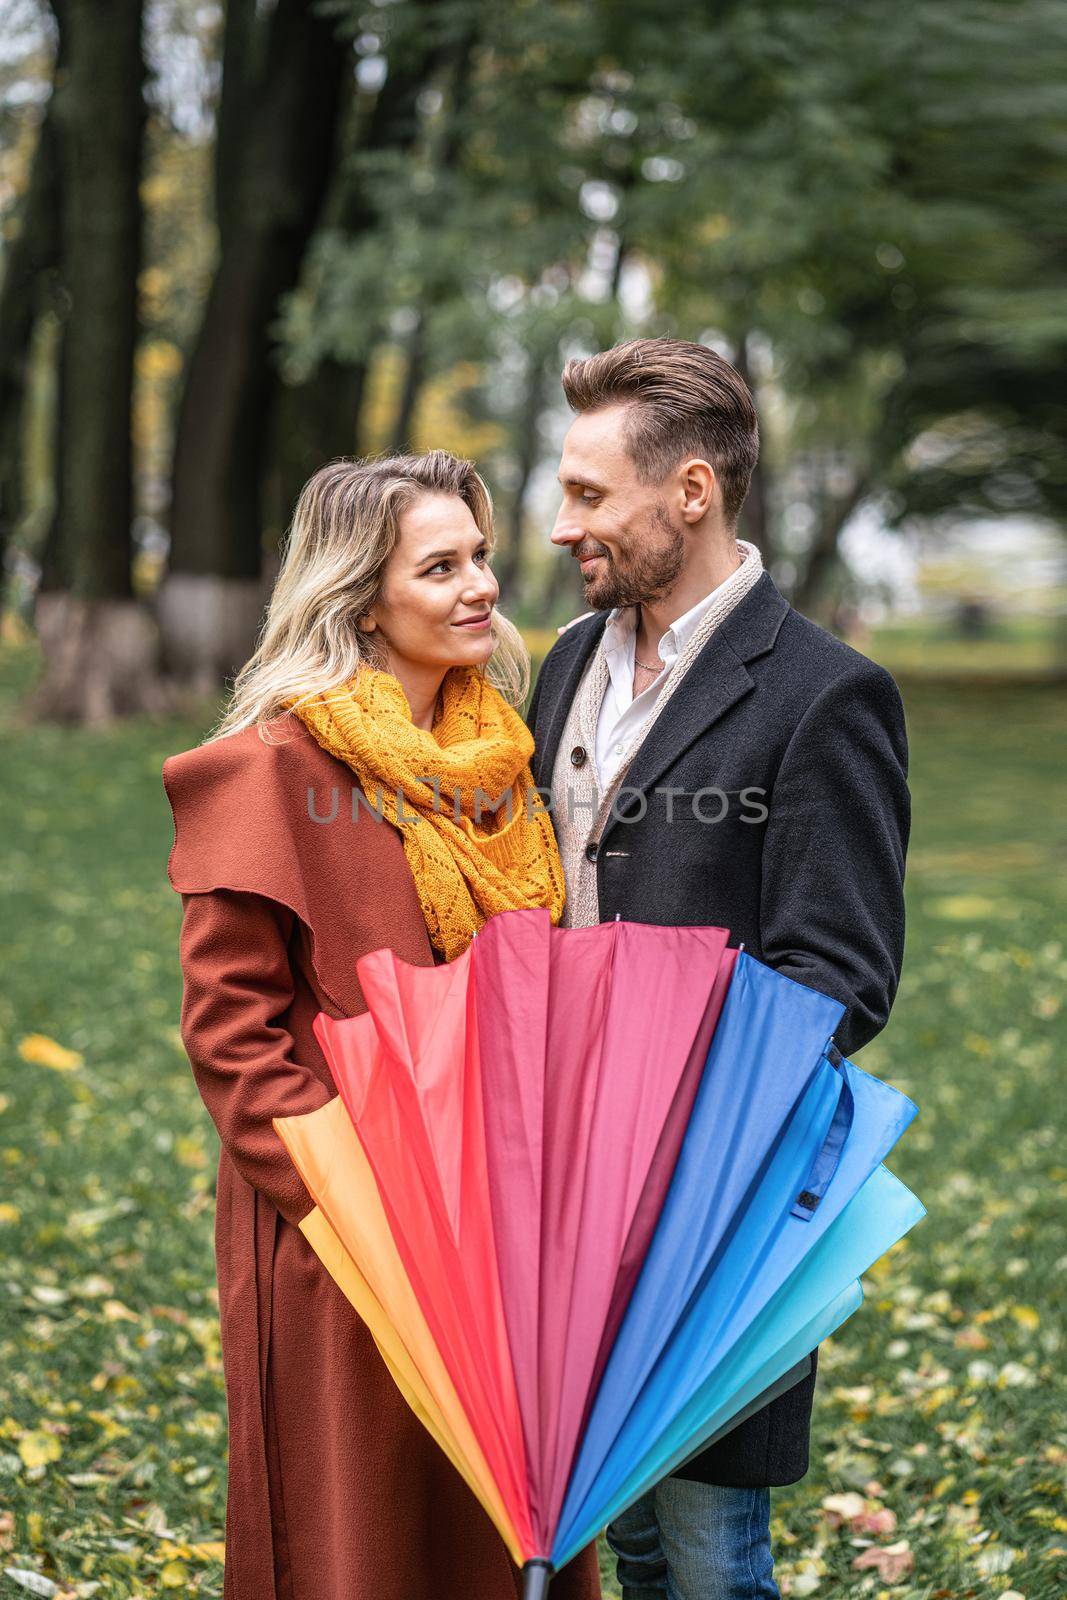 Looking in to the eyes of each other with closed rainbow umbrella beautiful in love couple standing in the park under a. A beautiful couple the autumn park in rainy weather.